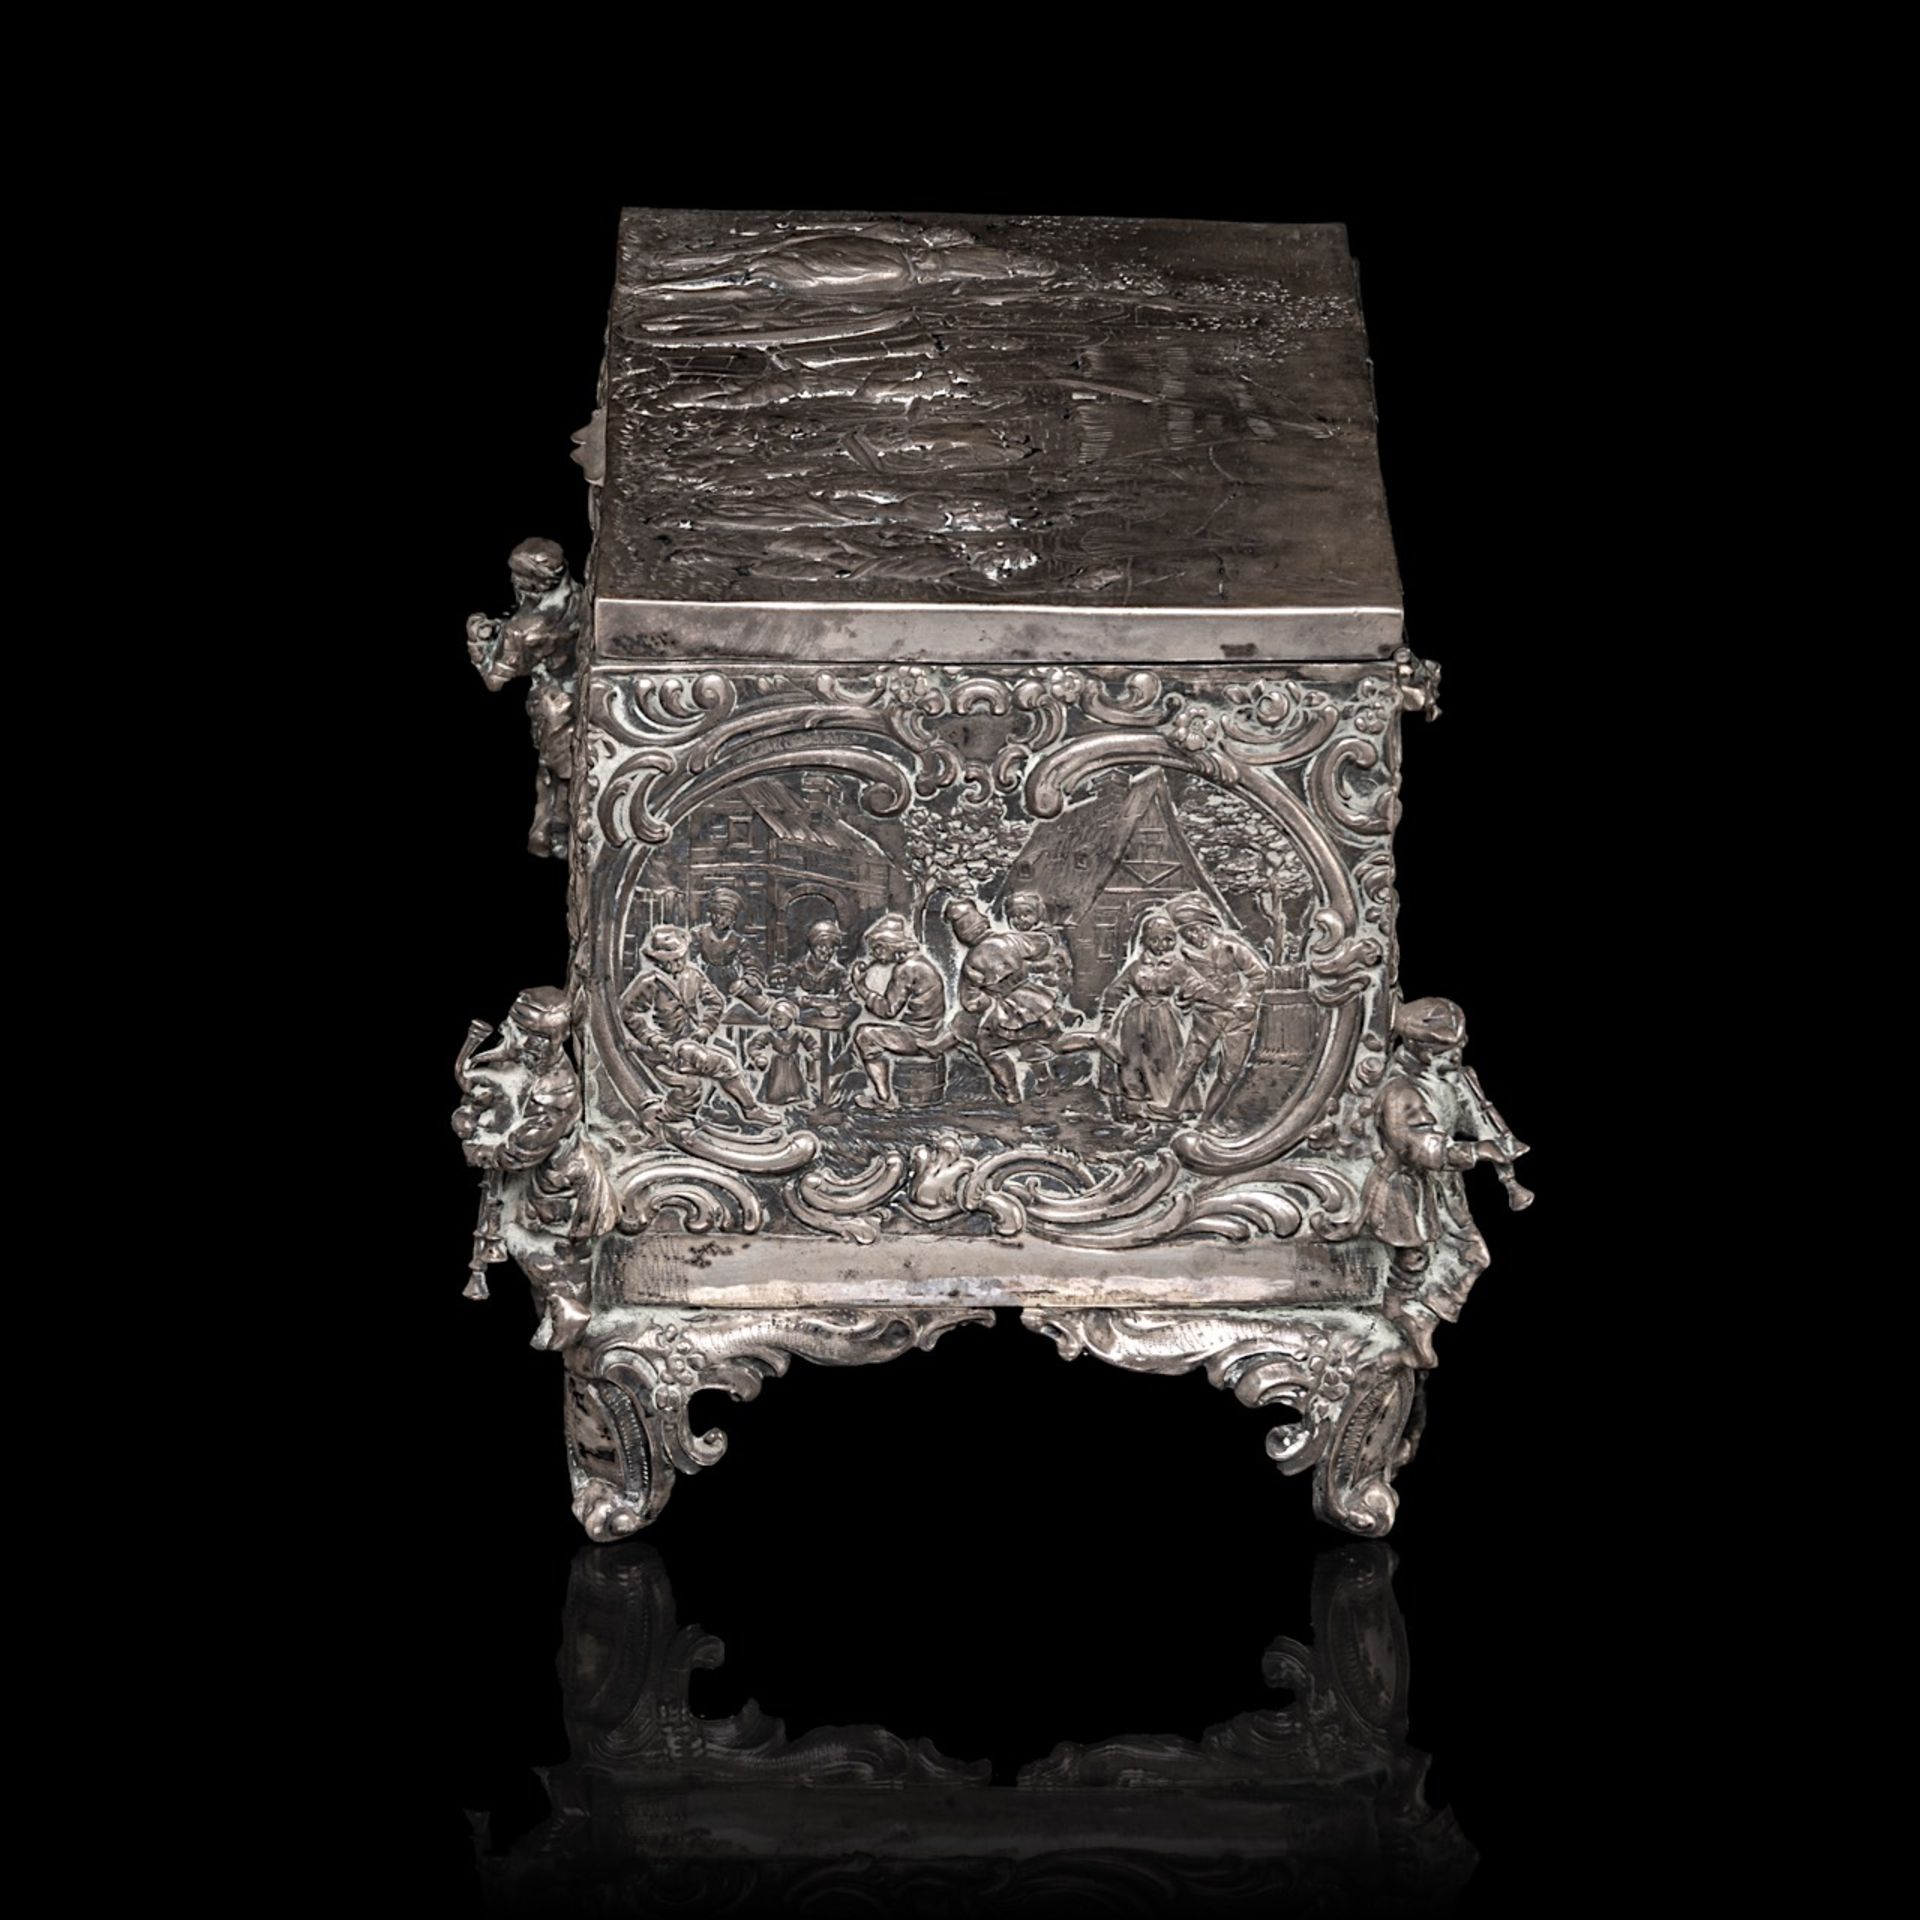 A Baroque Revival German silver jewellery casket, (1888-present), 800/000, weight ca: 1312 g 14.5 x - Image 3 of 9